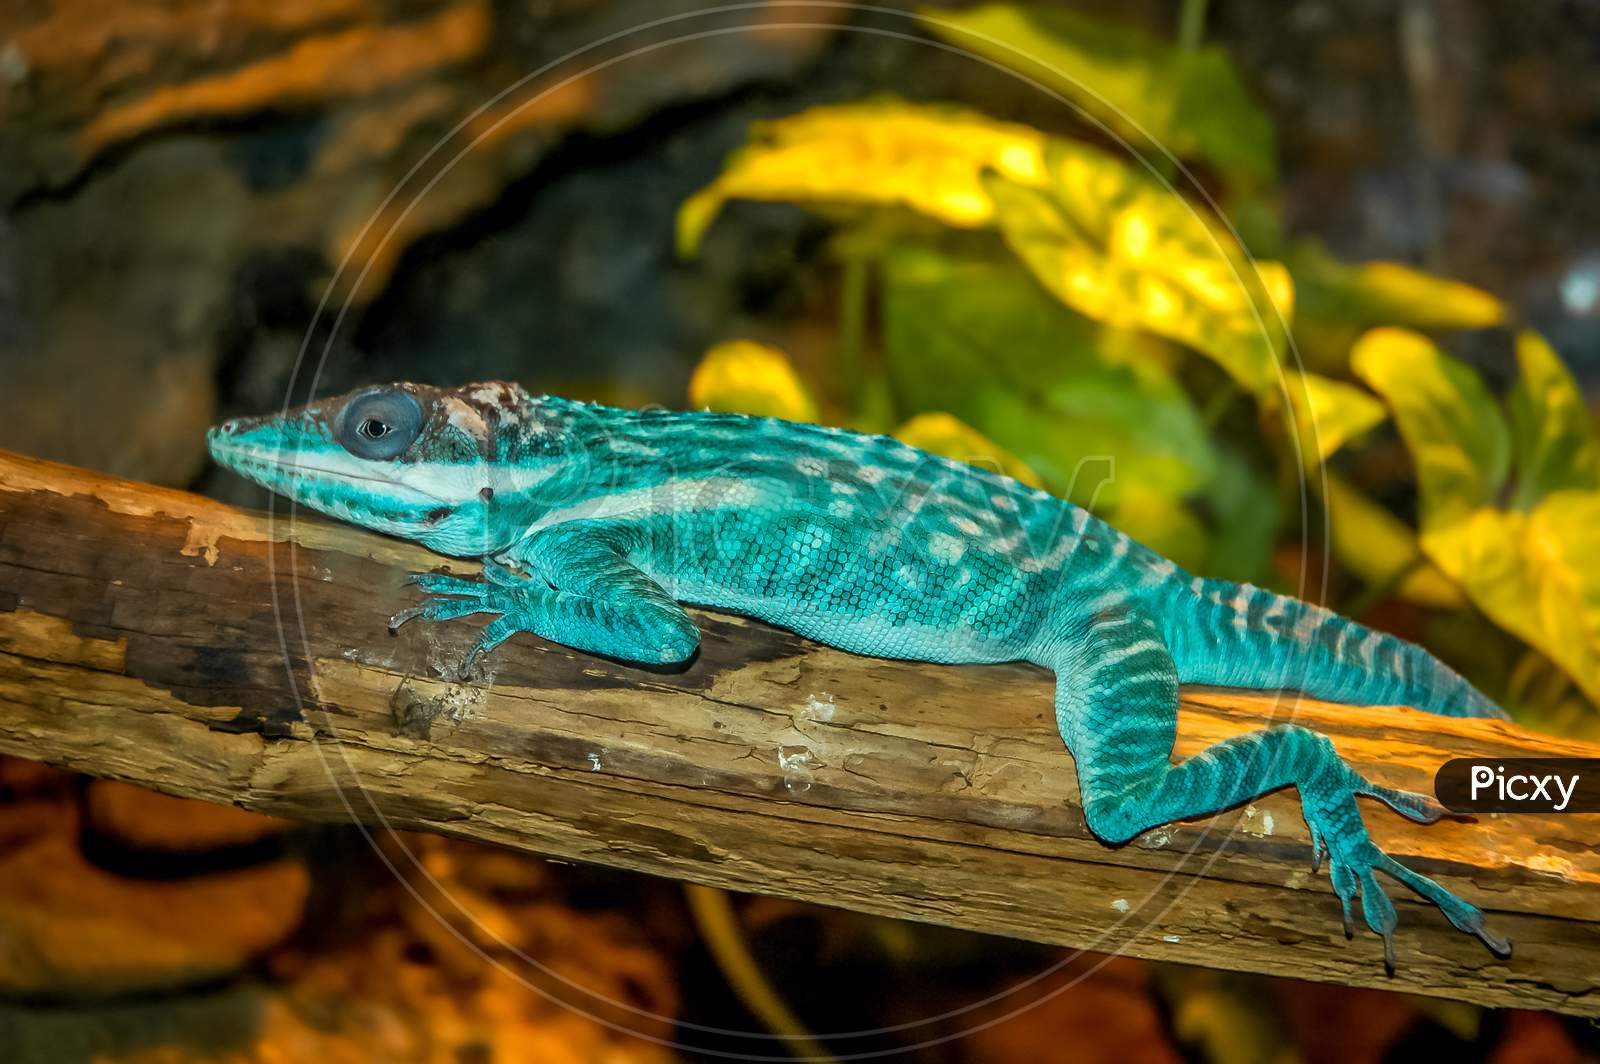 blue lizard on a branch with green background